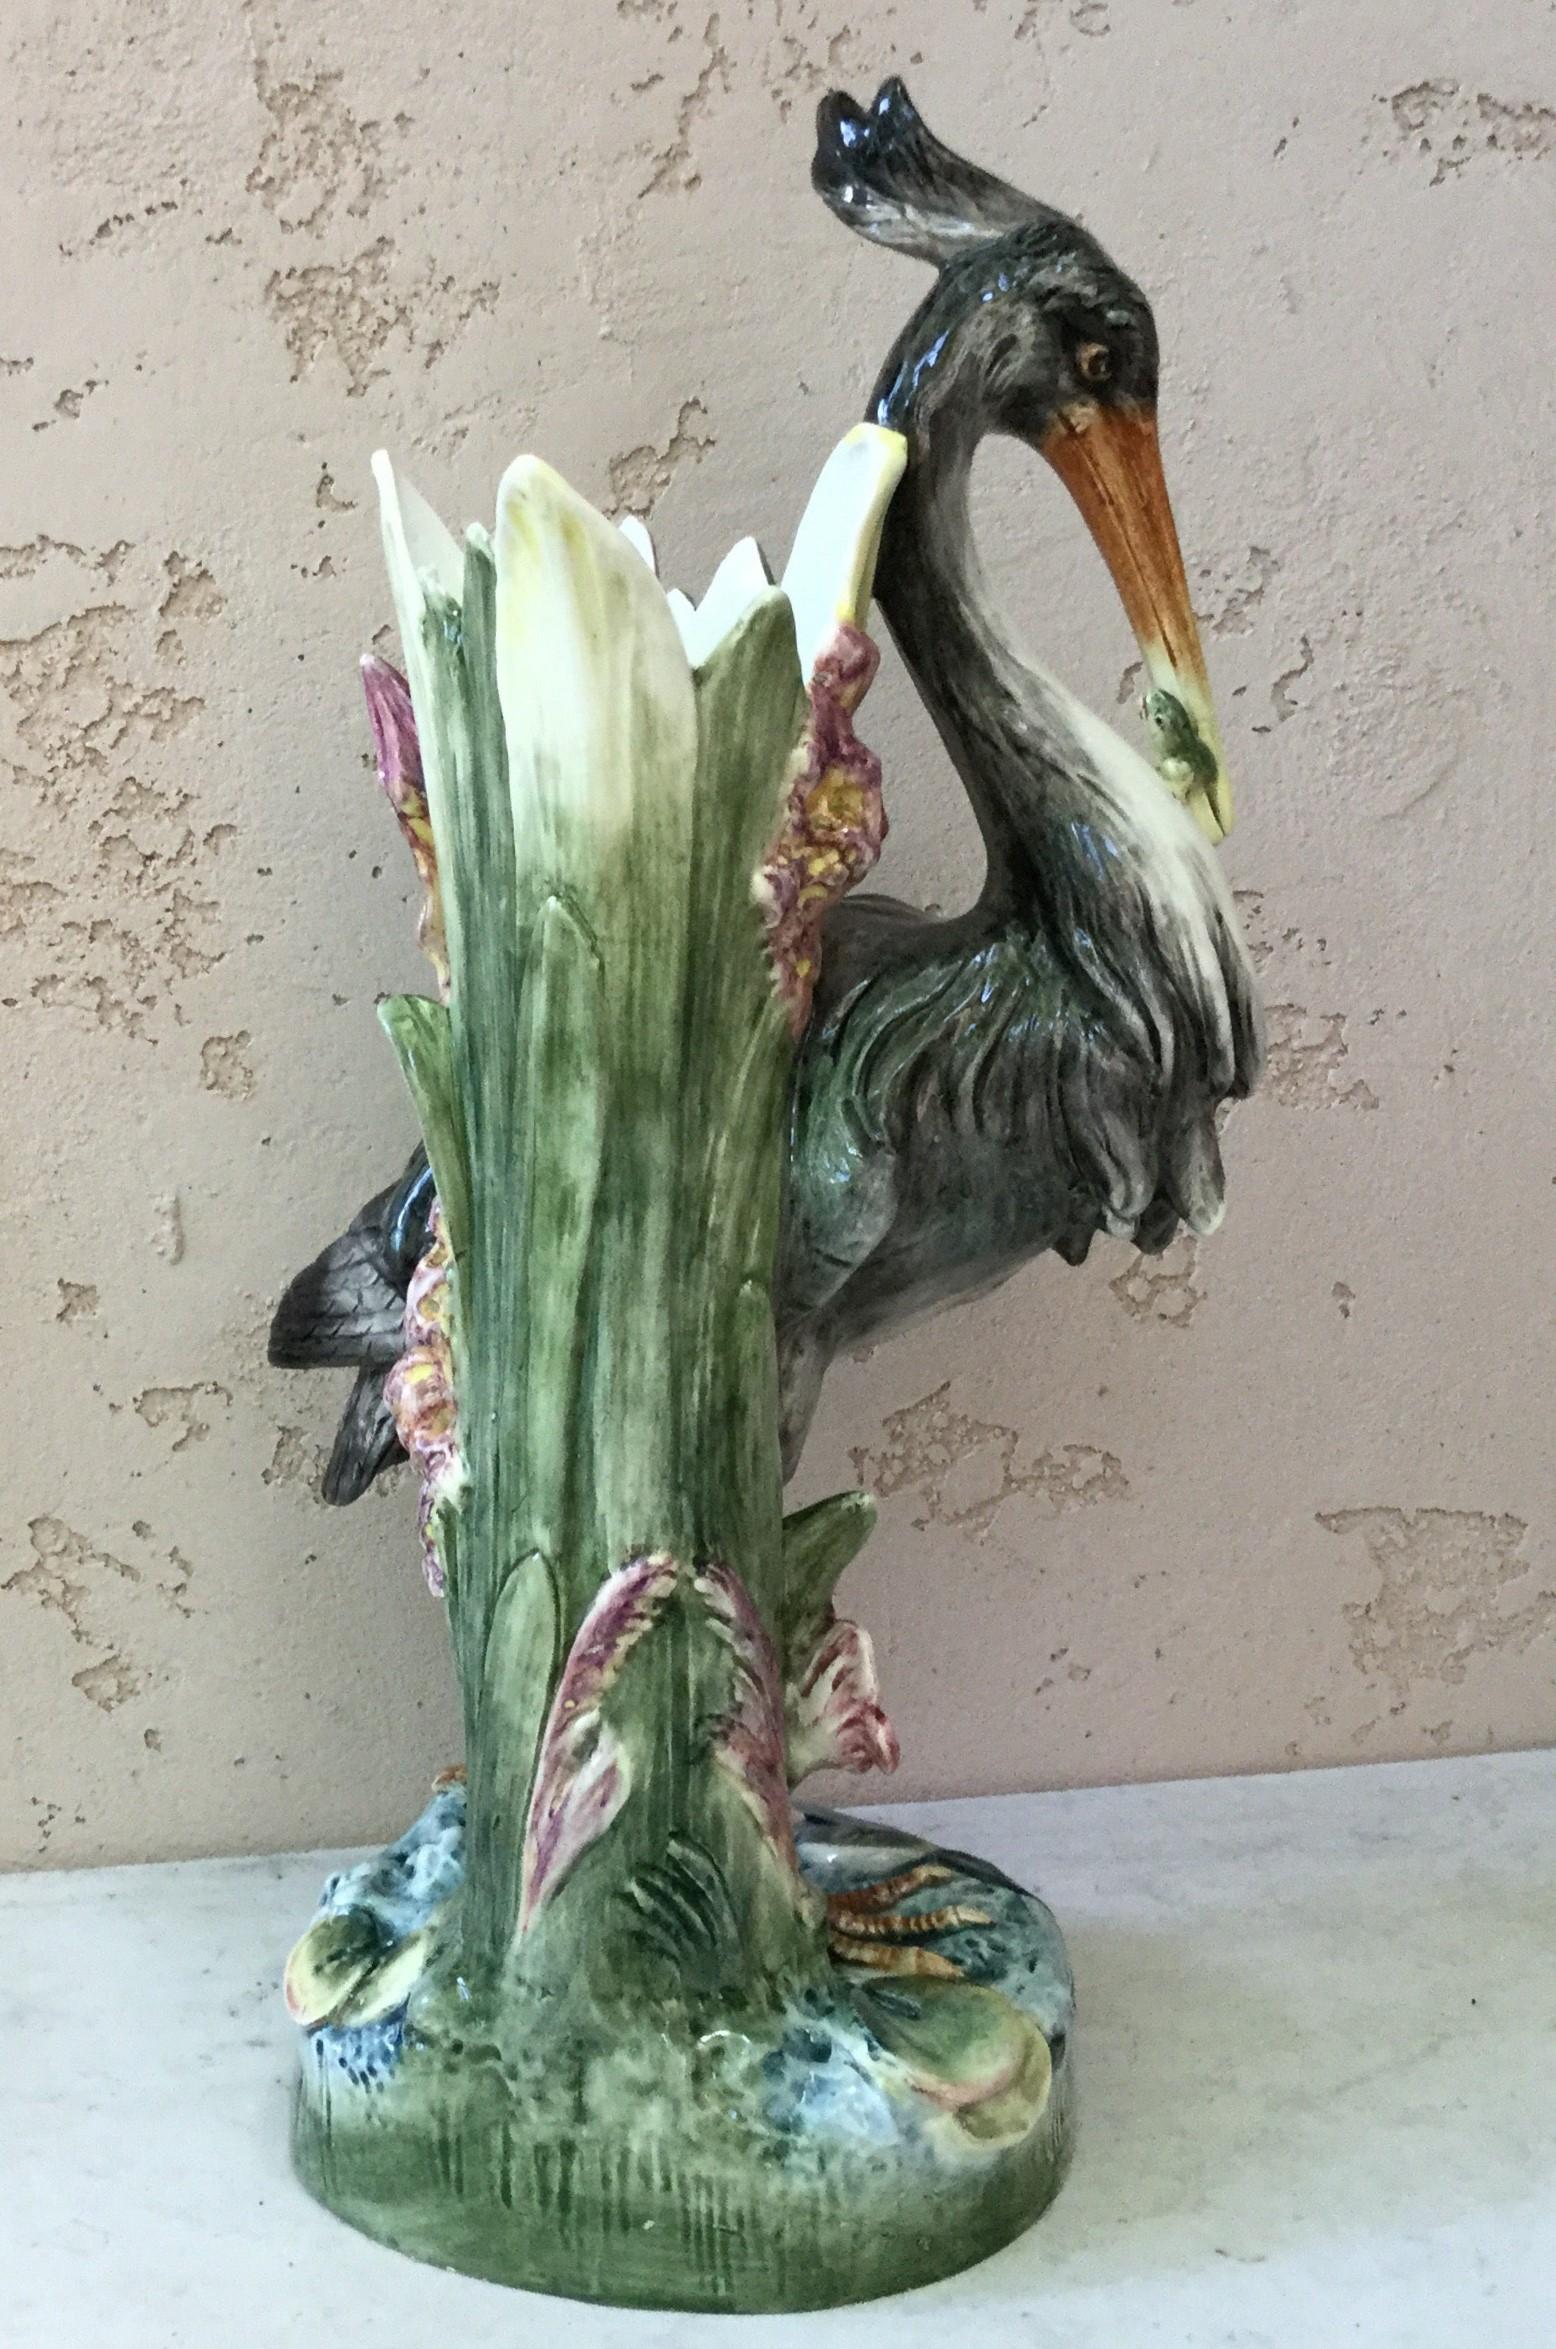 Large 19th century Austrian Majolica heron with a lizard on his beek, the vase on the back of the heron is decorated with aquatics plants and pink flowers.